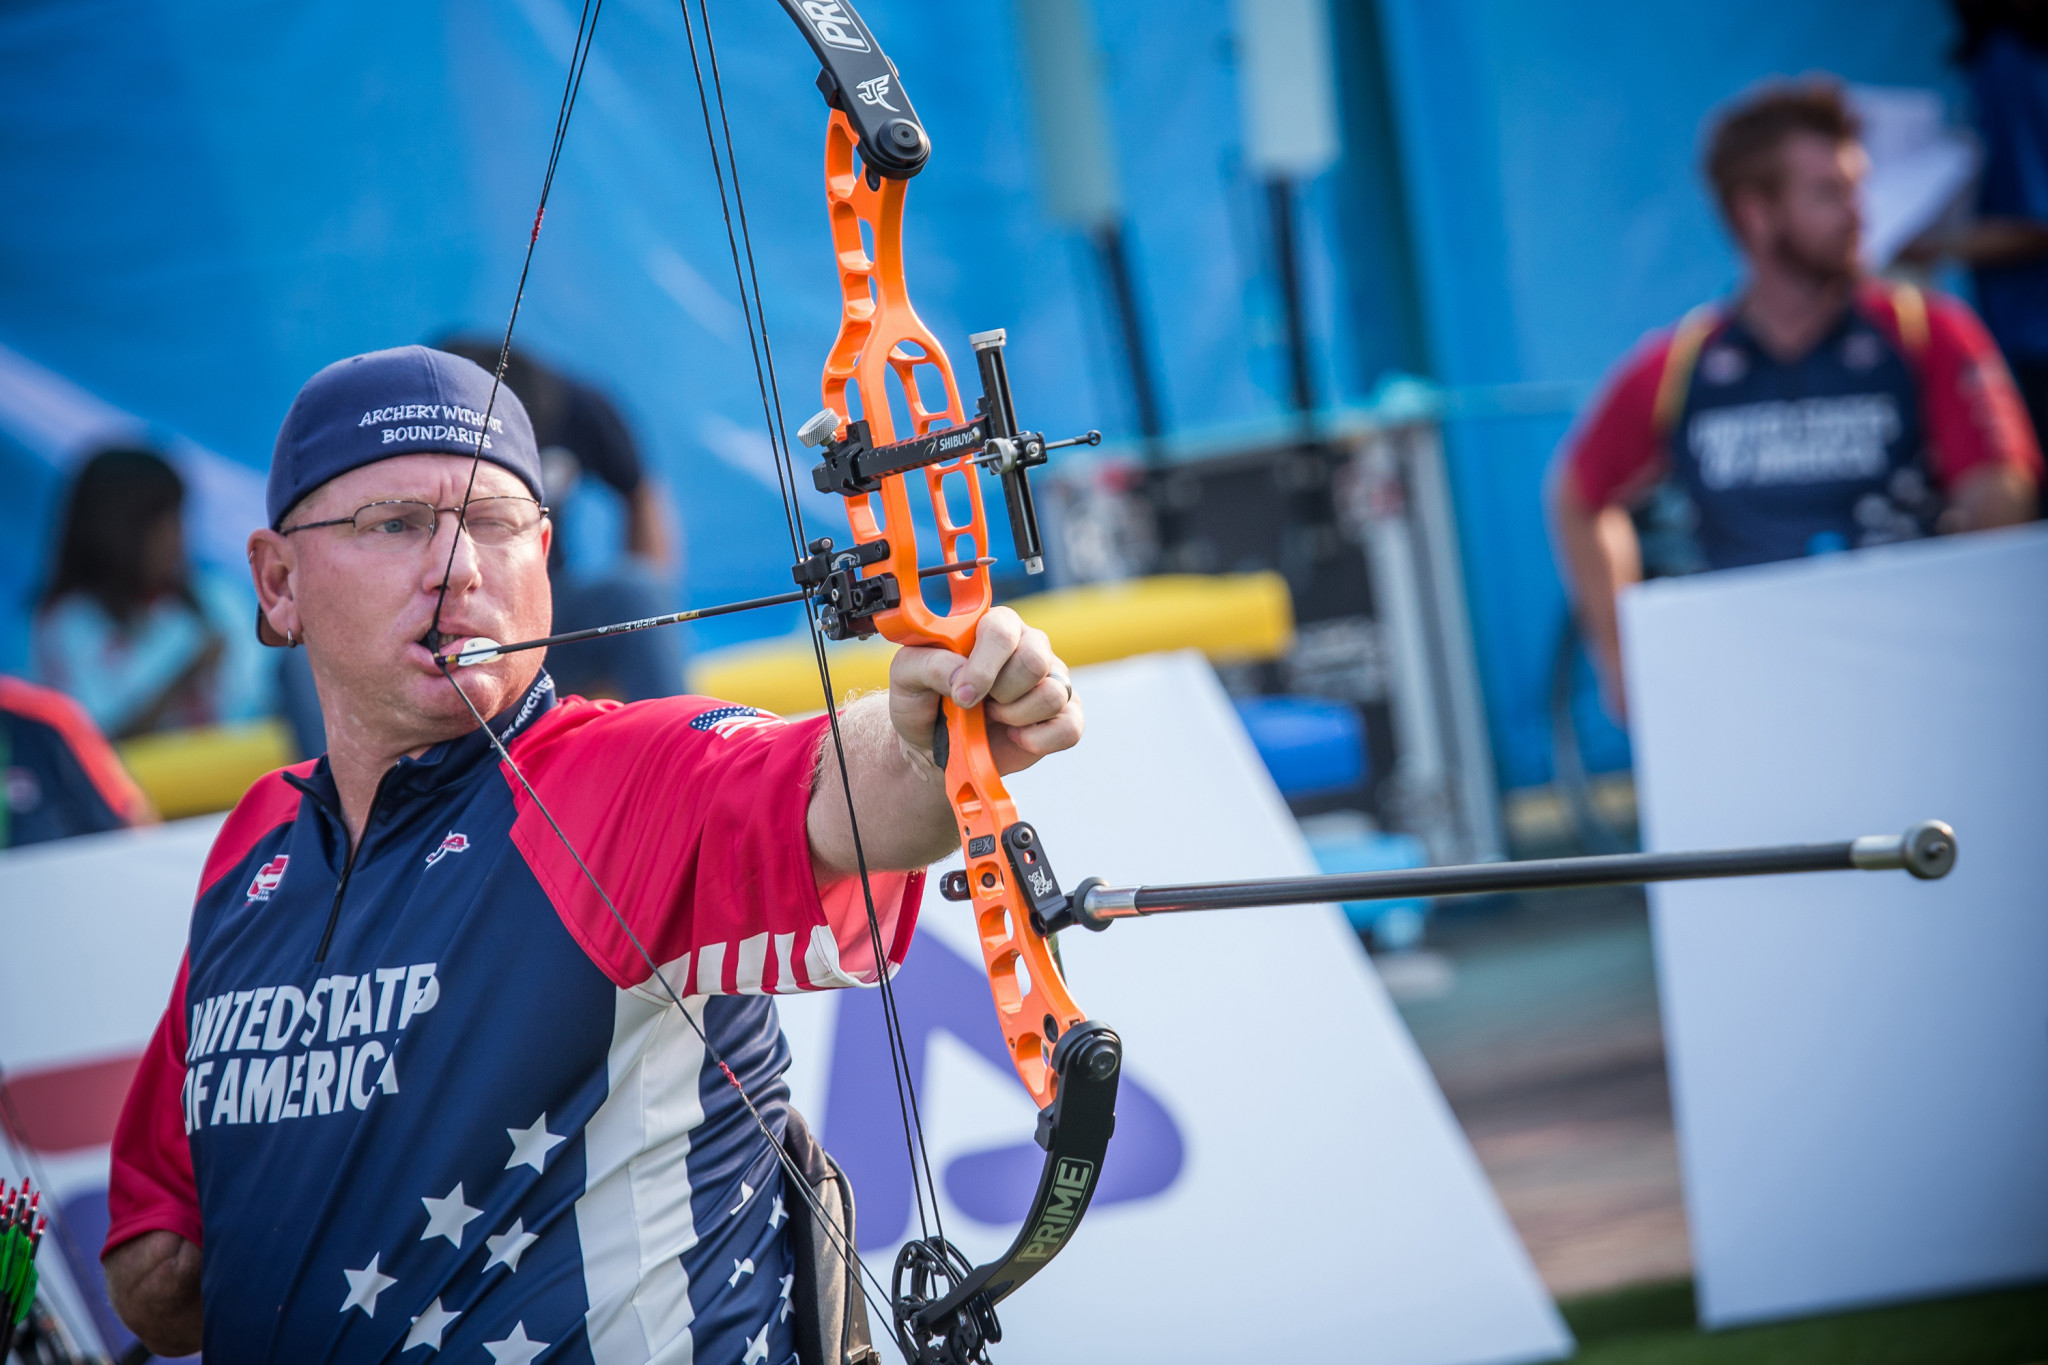 Jeff Fabry is nominated after his success at the World Para Archery Championships in Beijing ©Getty Images